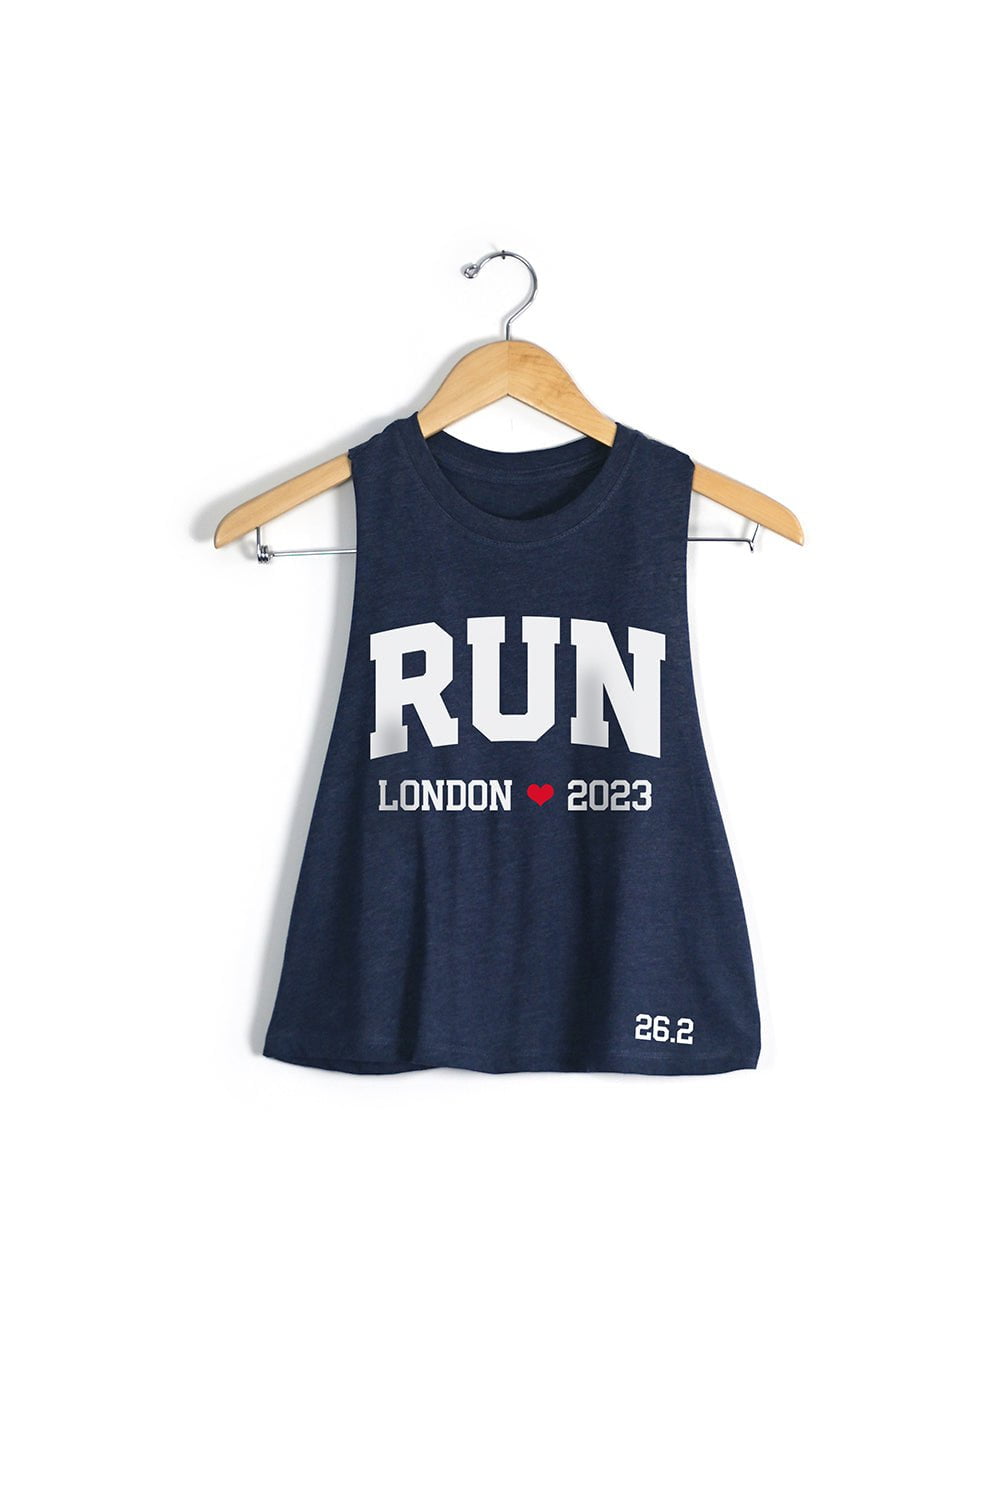 There's nothing Minnie about a Half Marathon Disney Inspired Tank